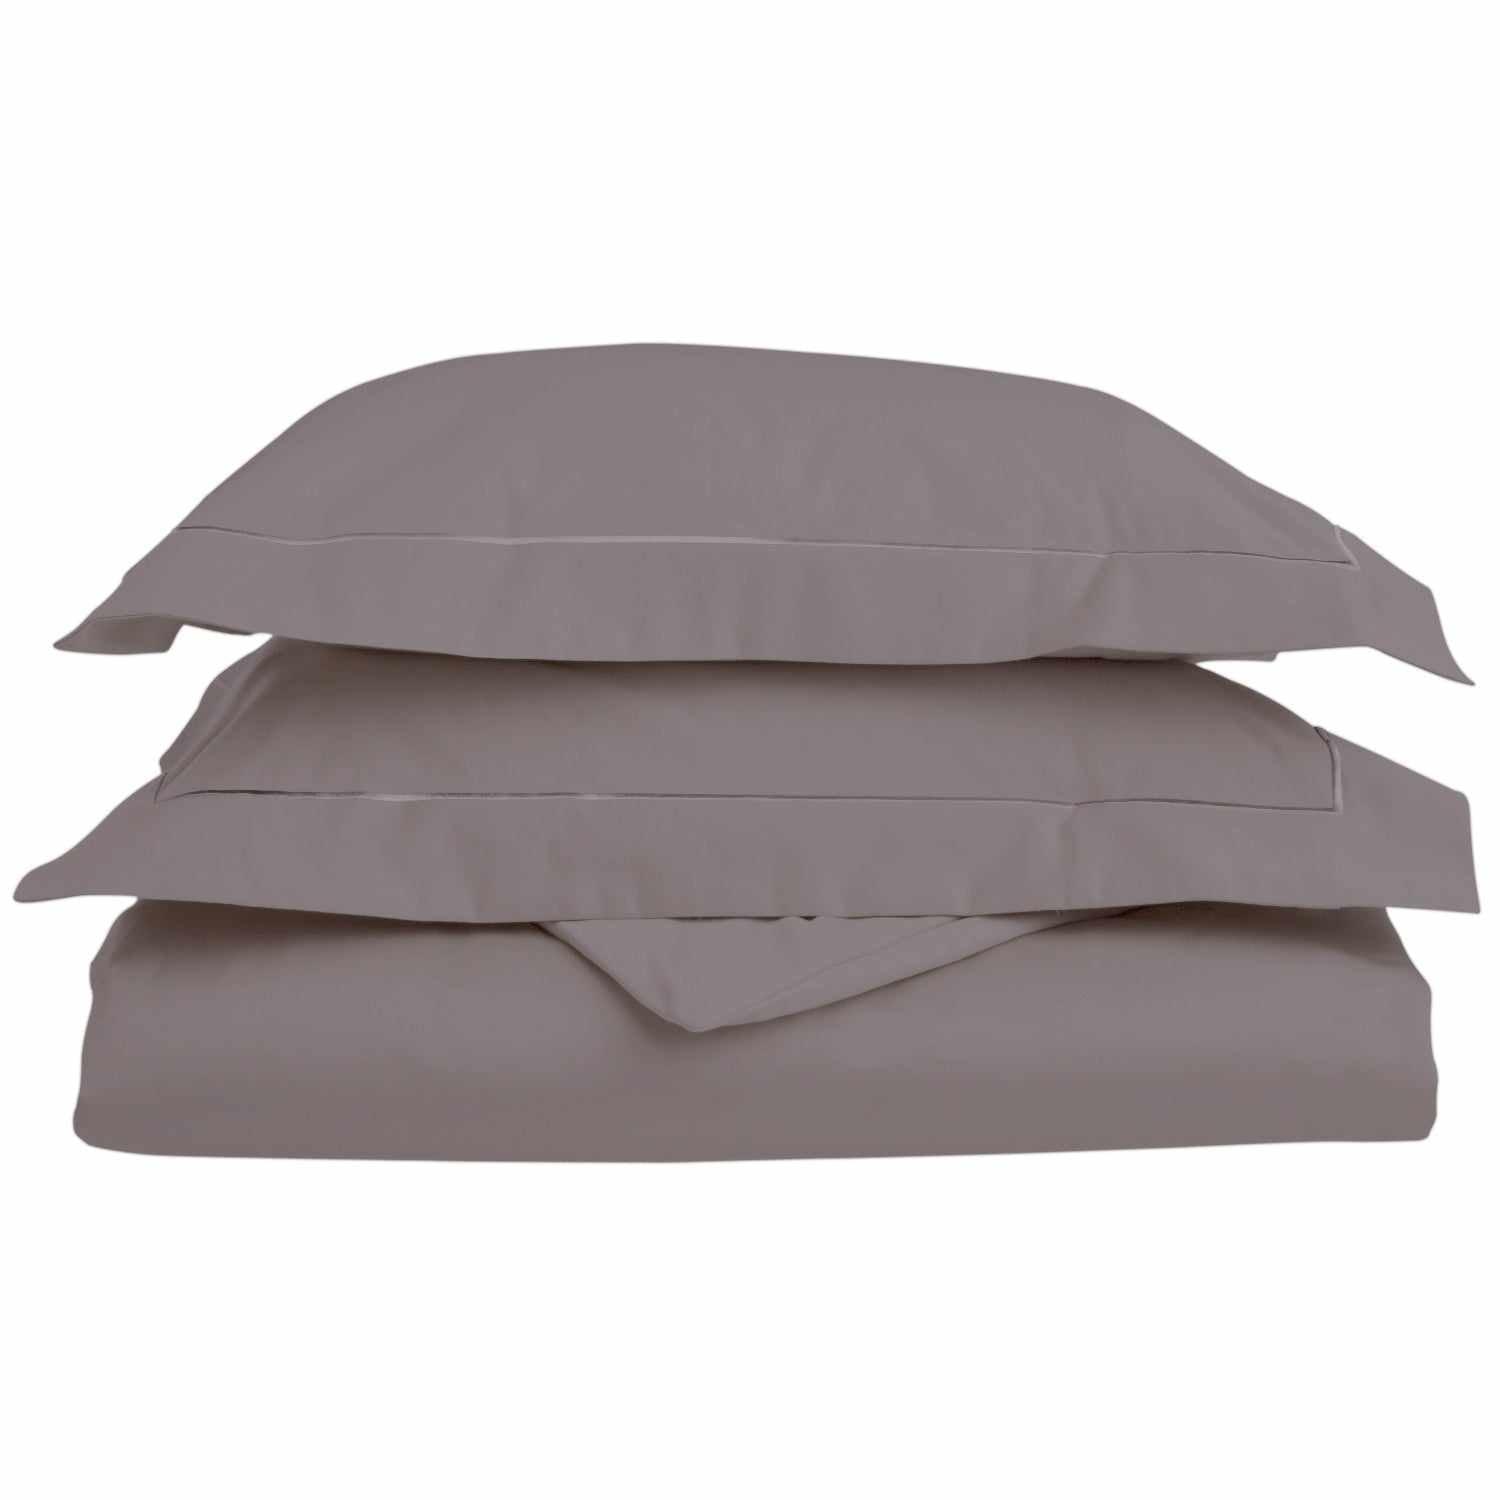  Superior Embroidered Egyptian Cotton Duvet Cover Set - Grey